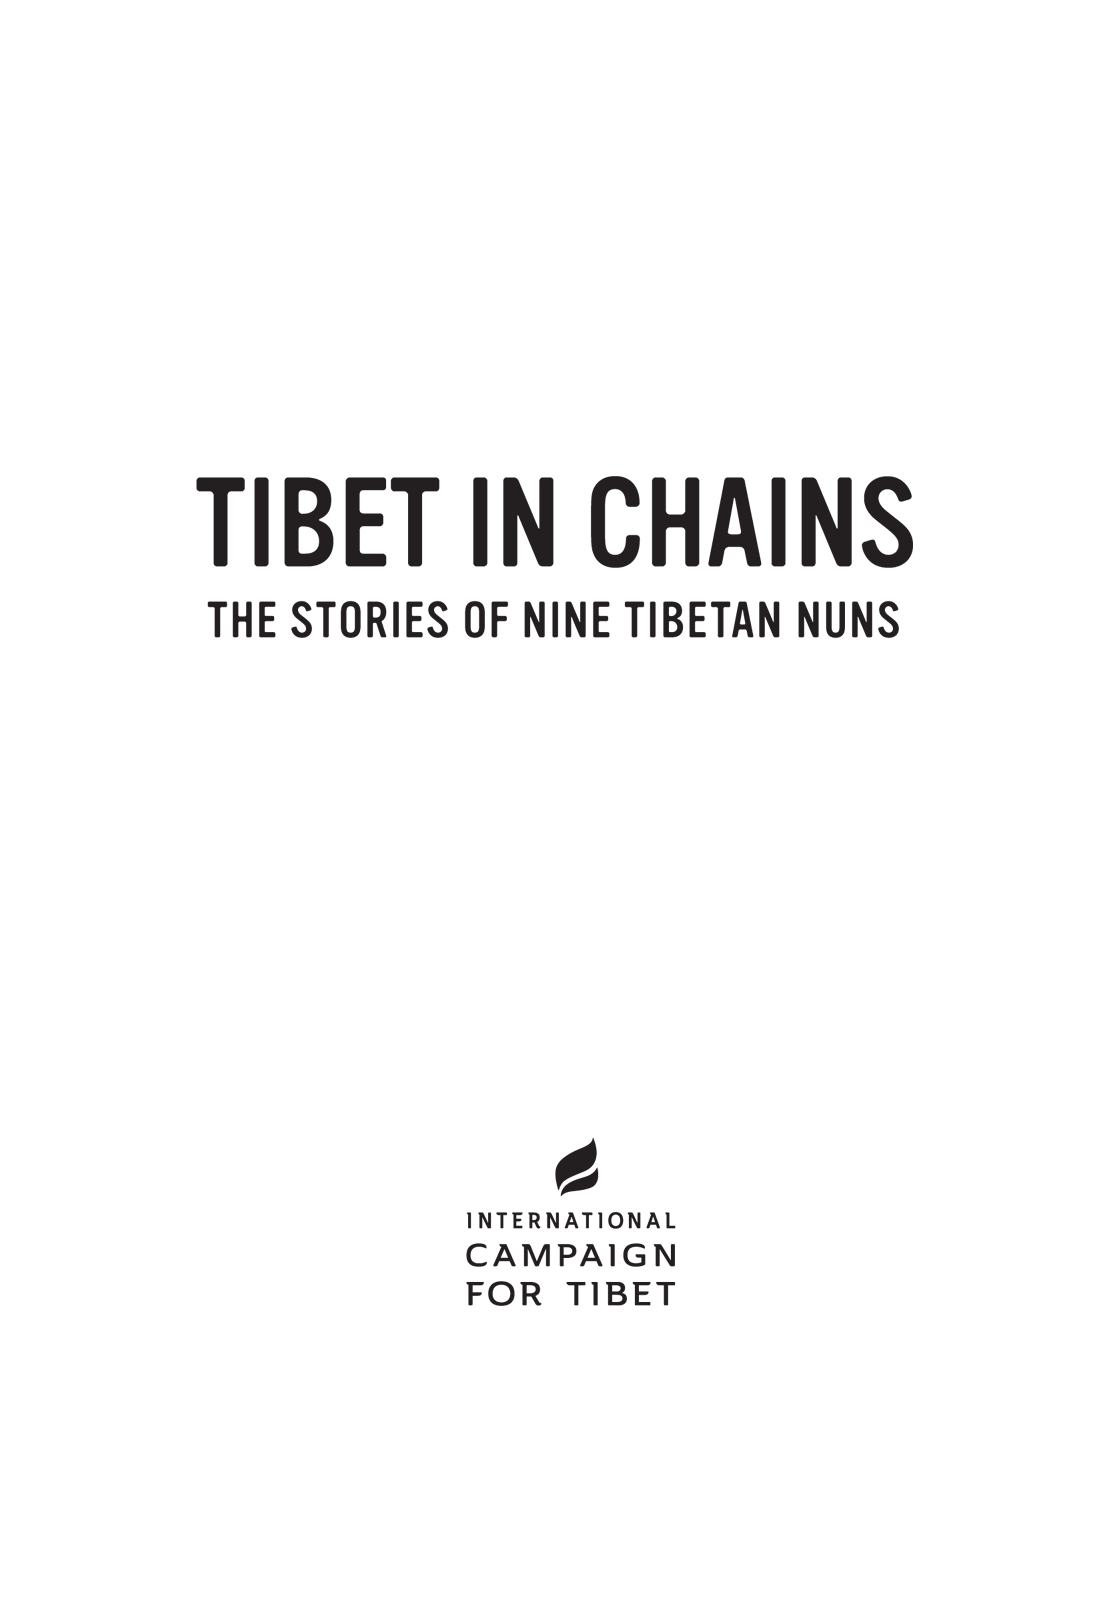 2020 International Campaign for Tibet All rights reserved ISBN - photo 2